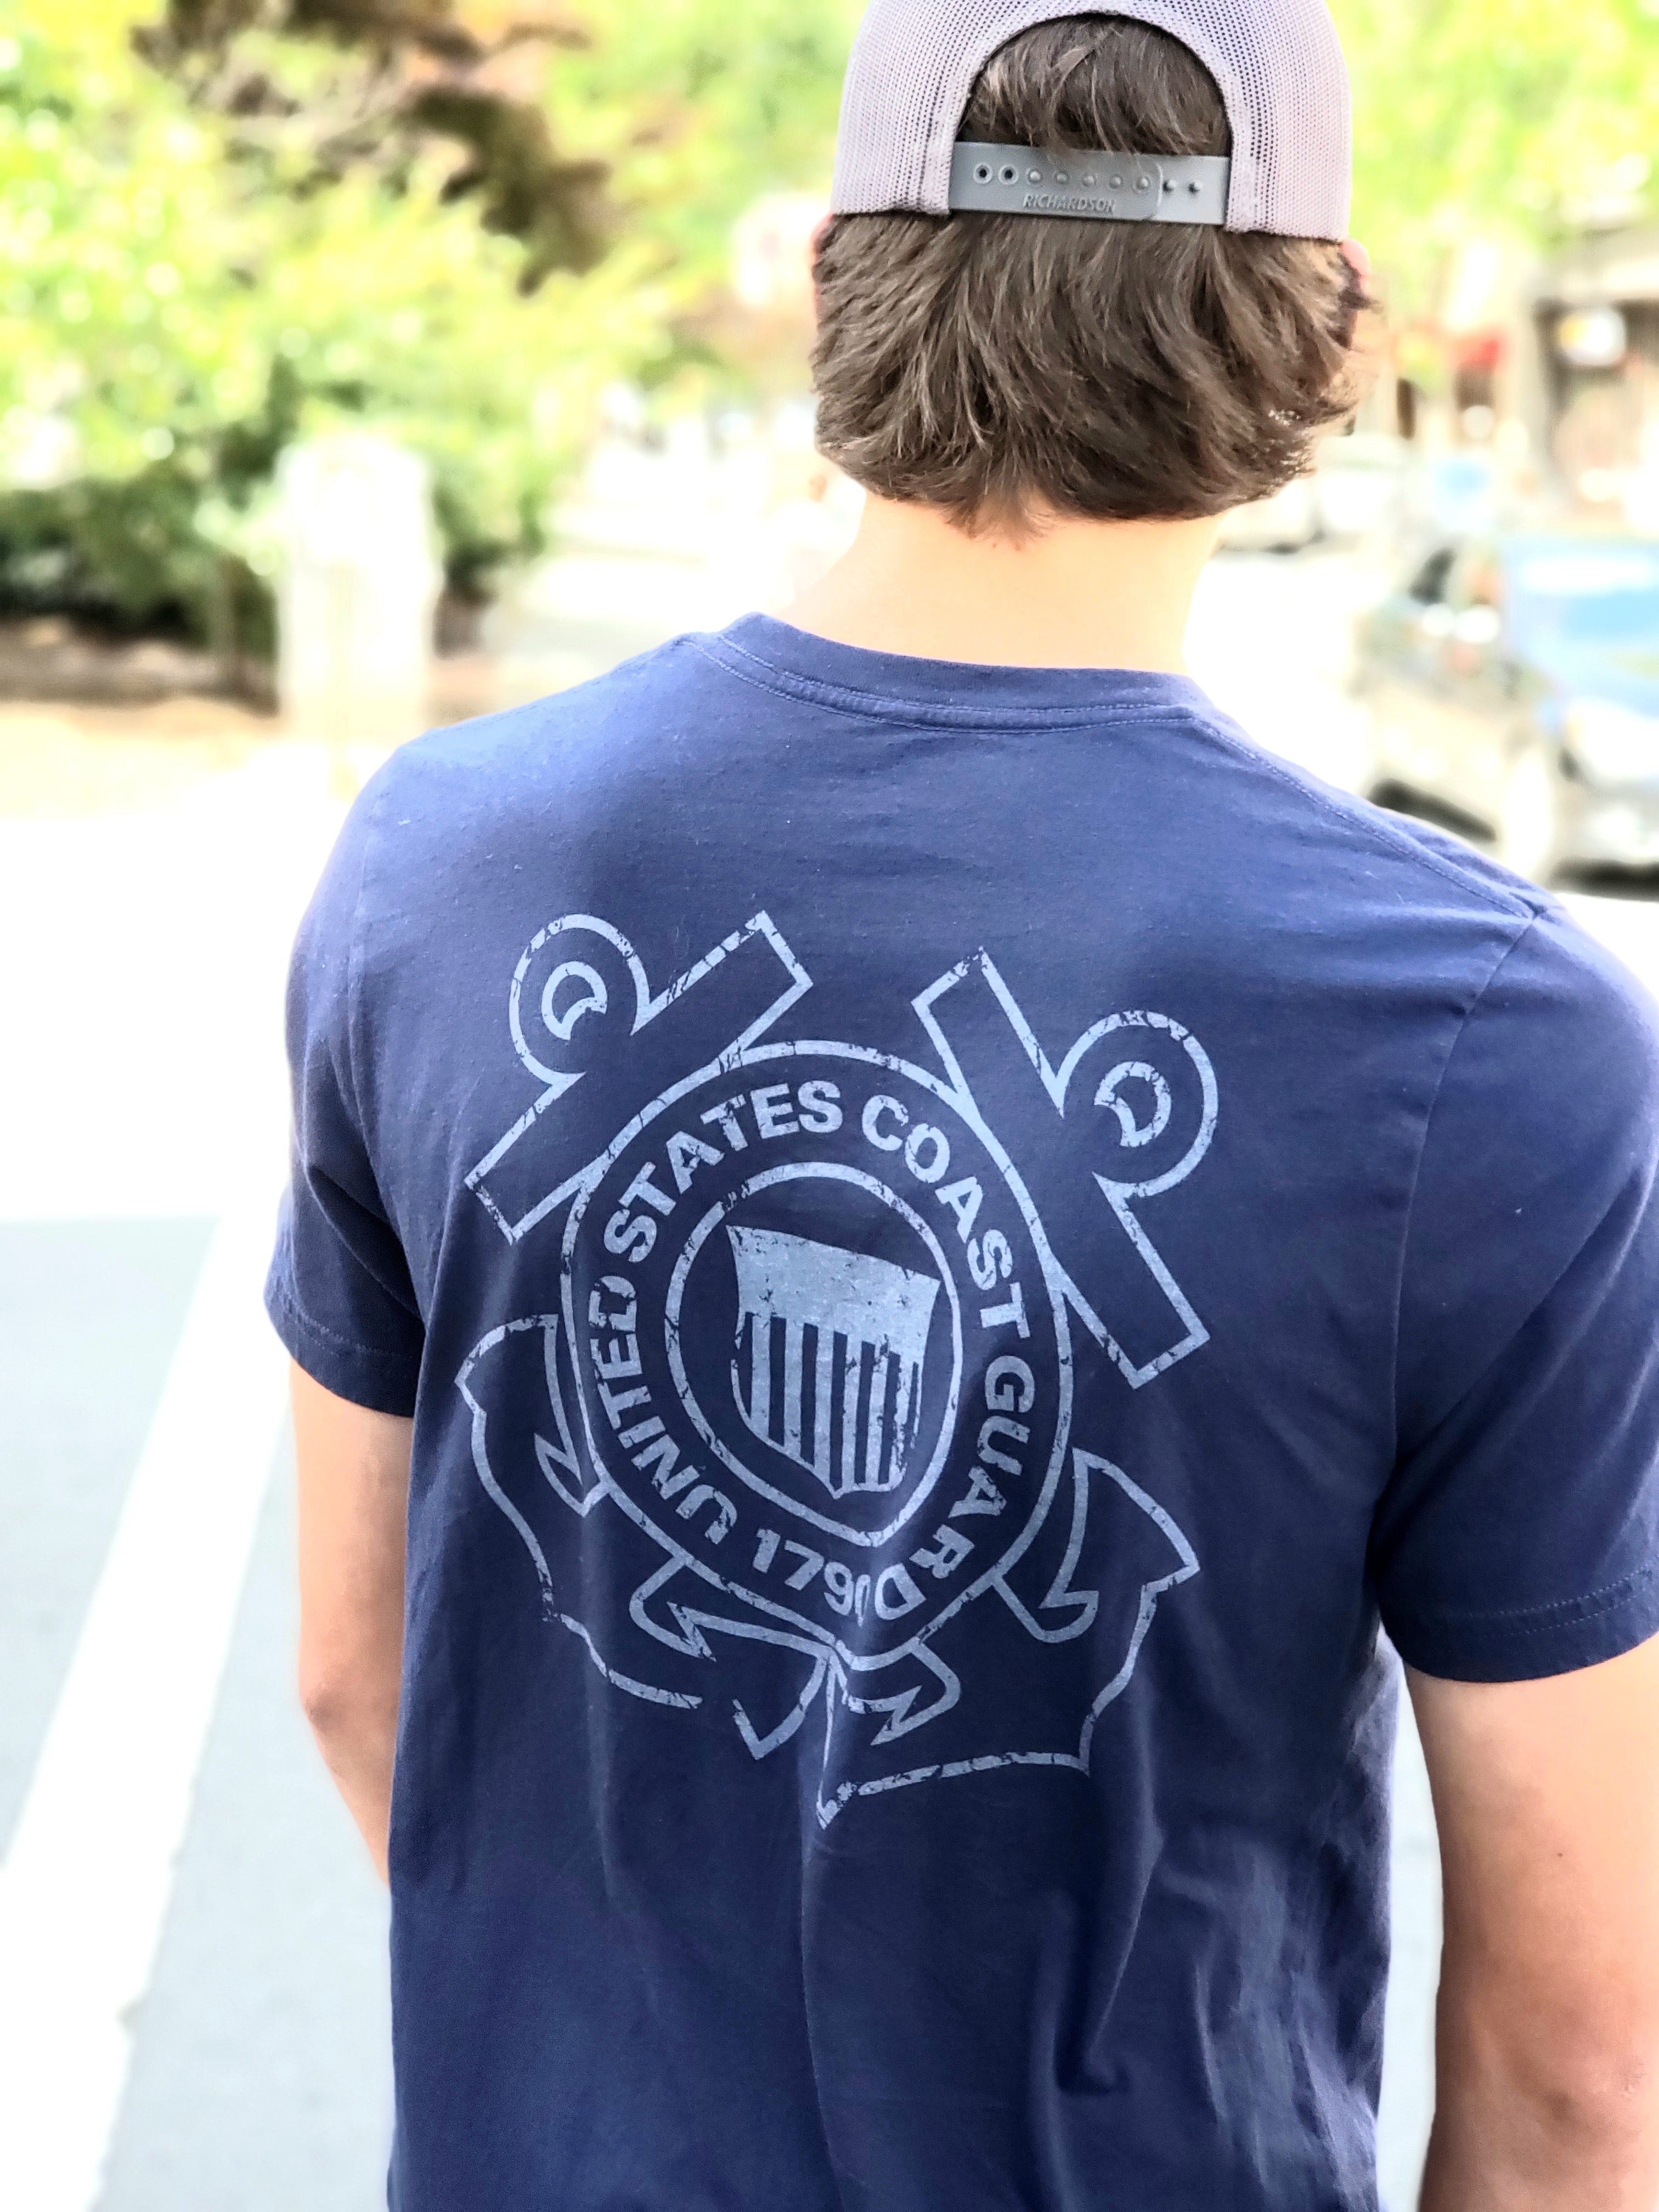 Coast Guard Licensed Tees - Do Work That Matters